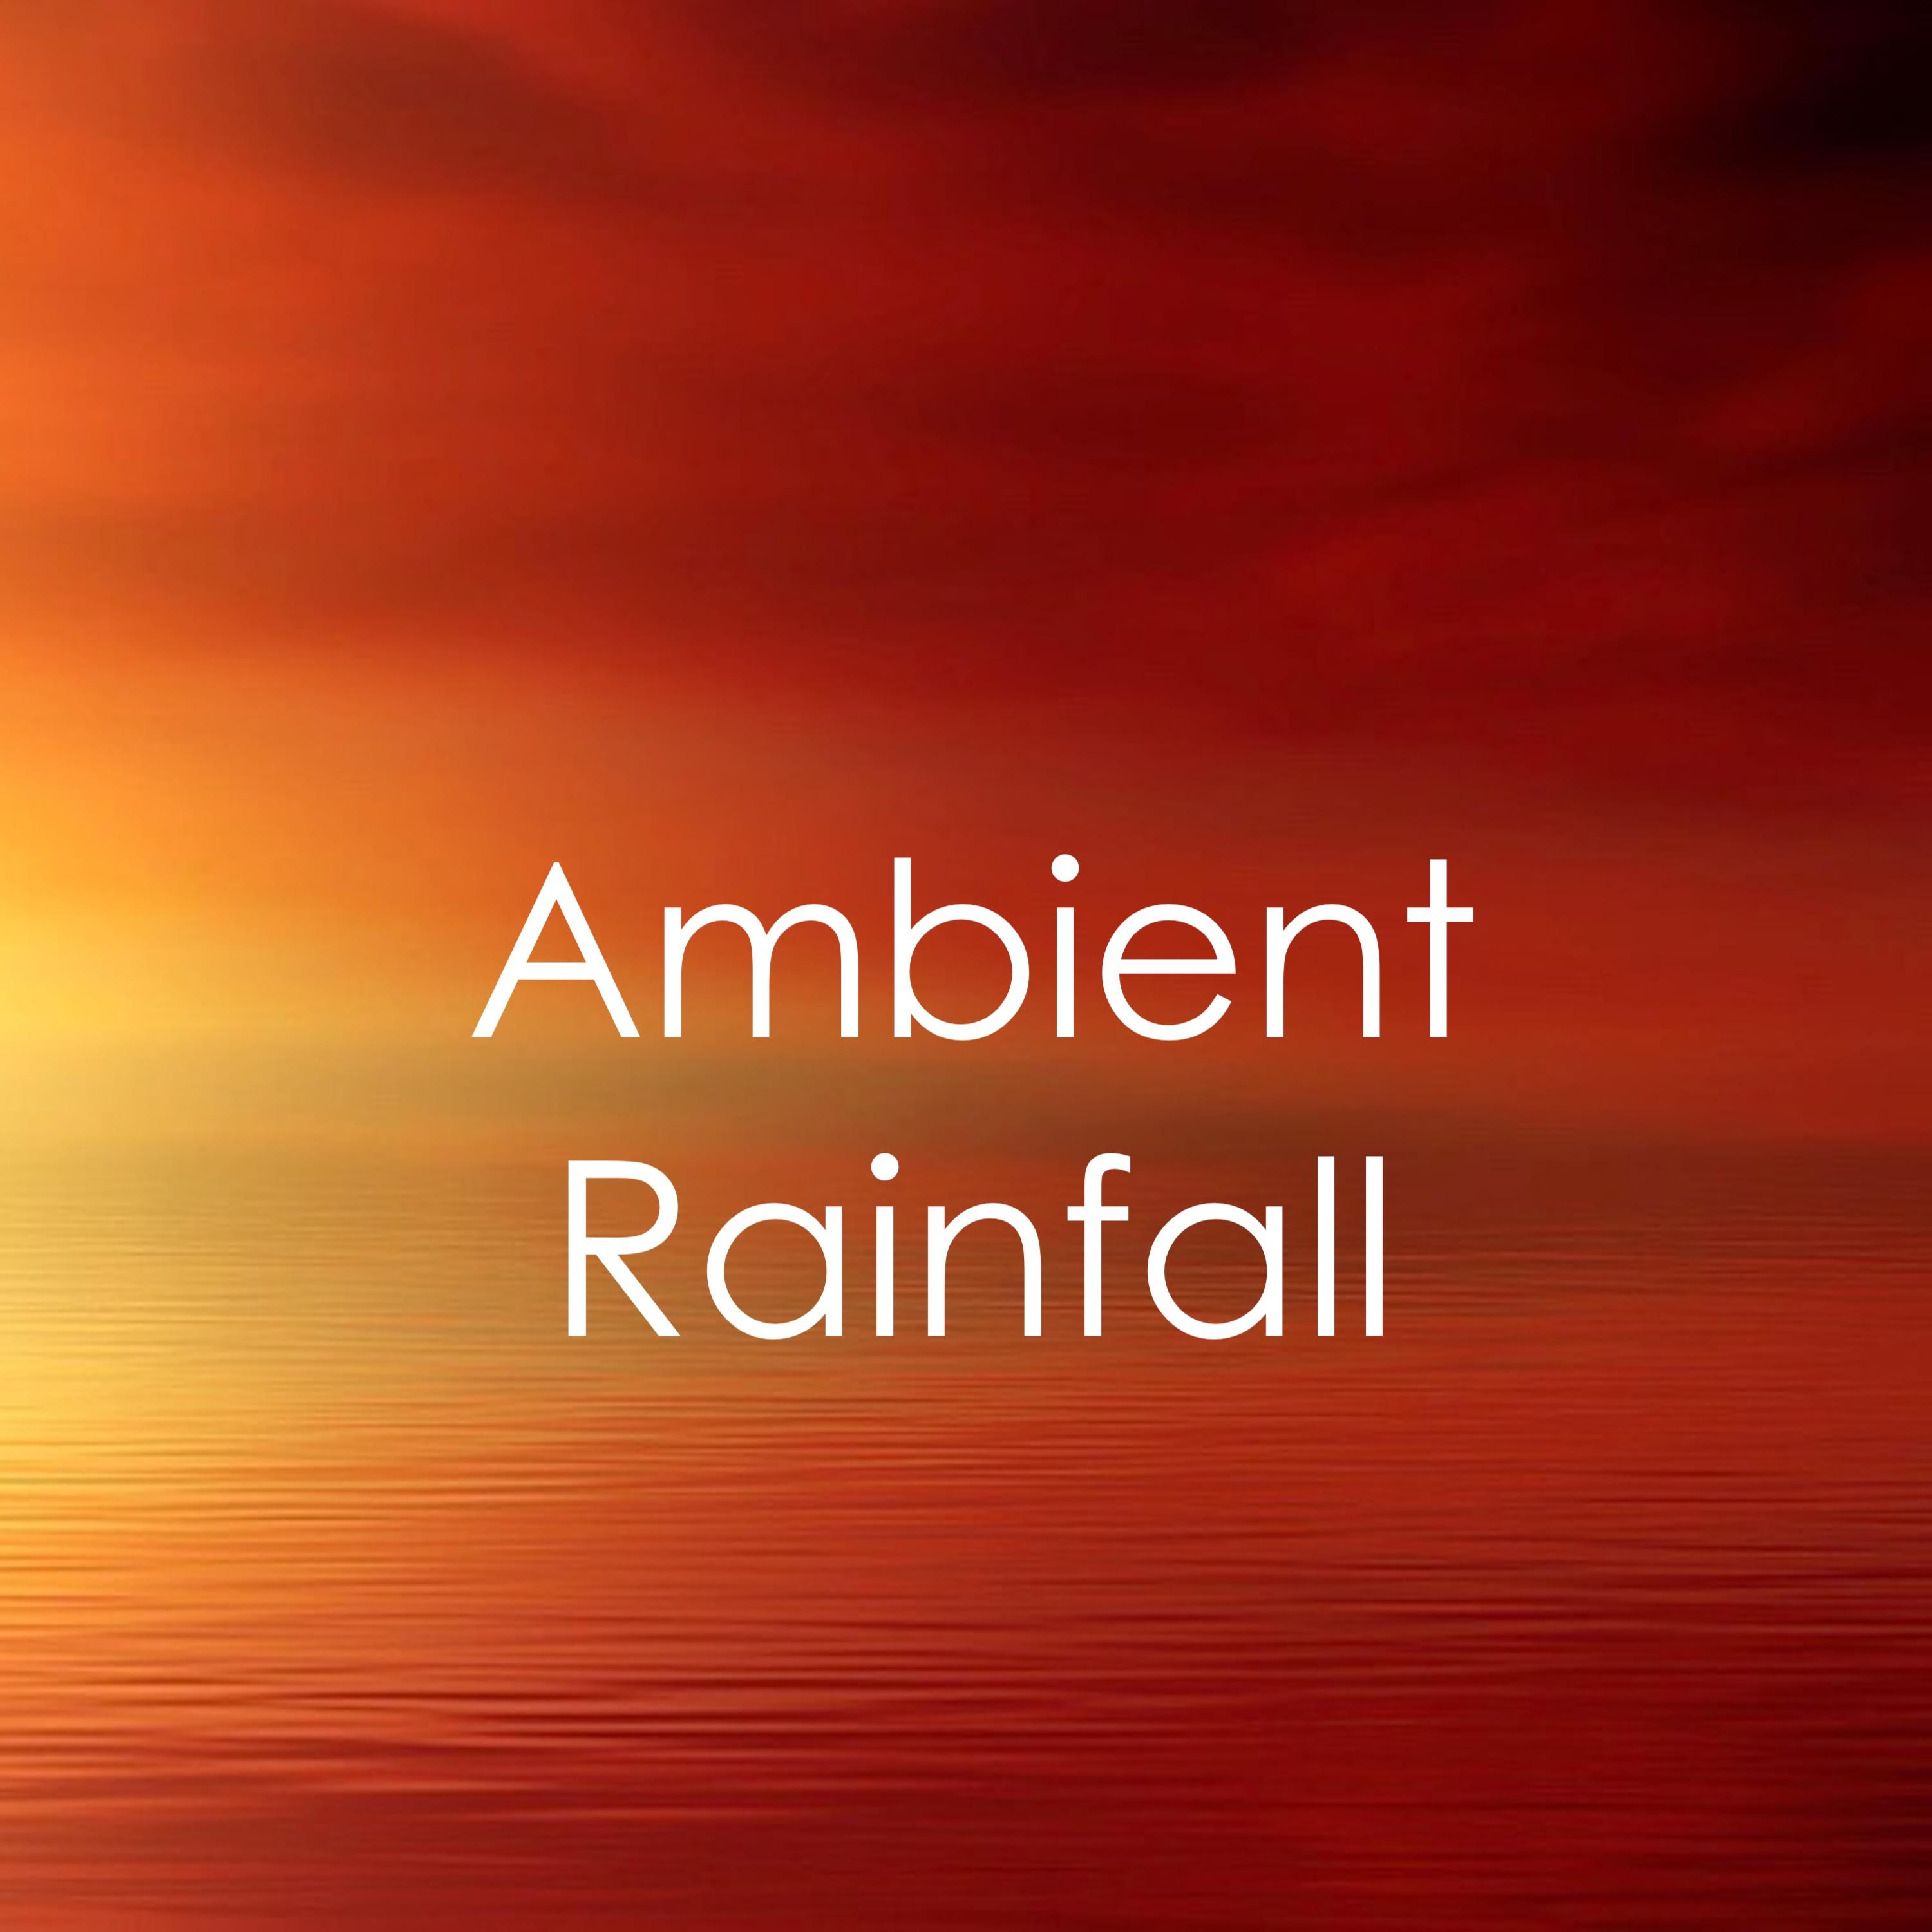 17 Meditation Relaxation Sounds -Natural and Ambient Rainfall